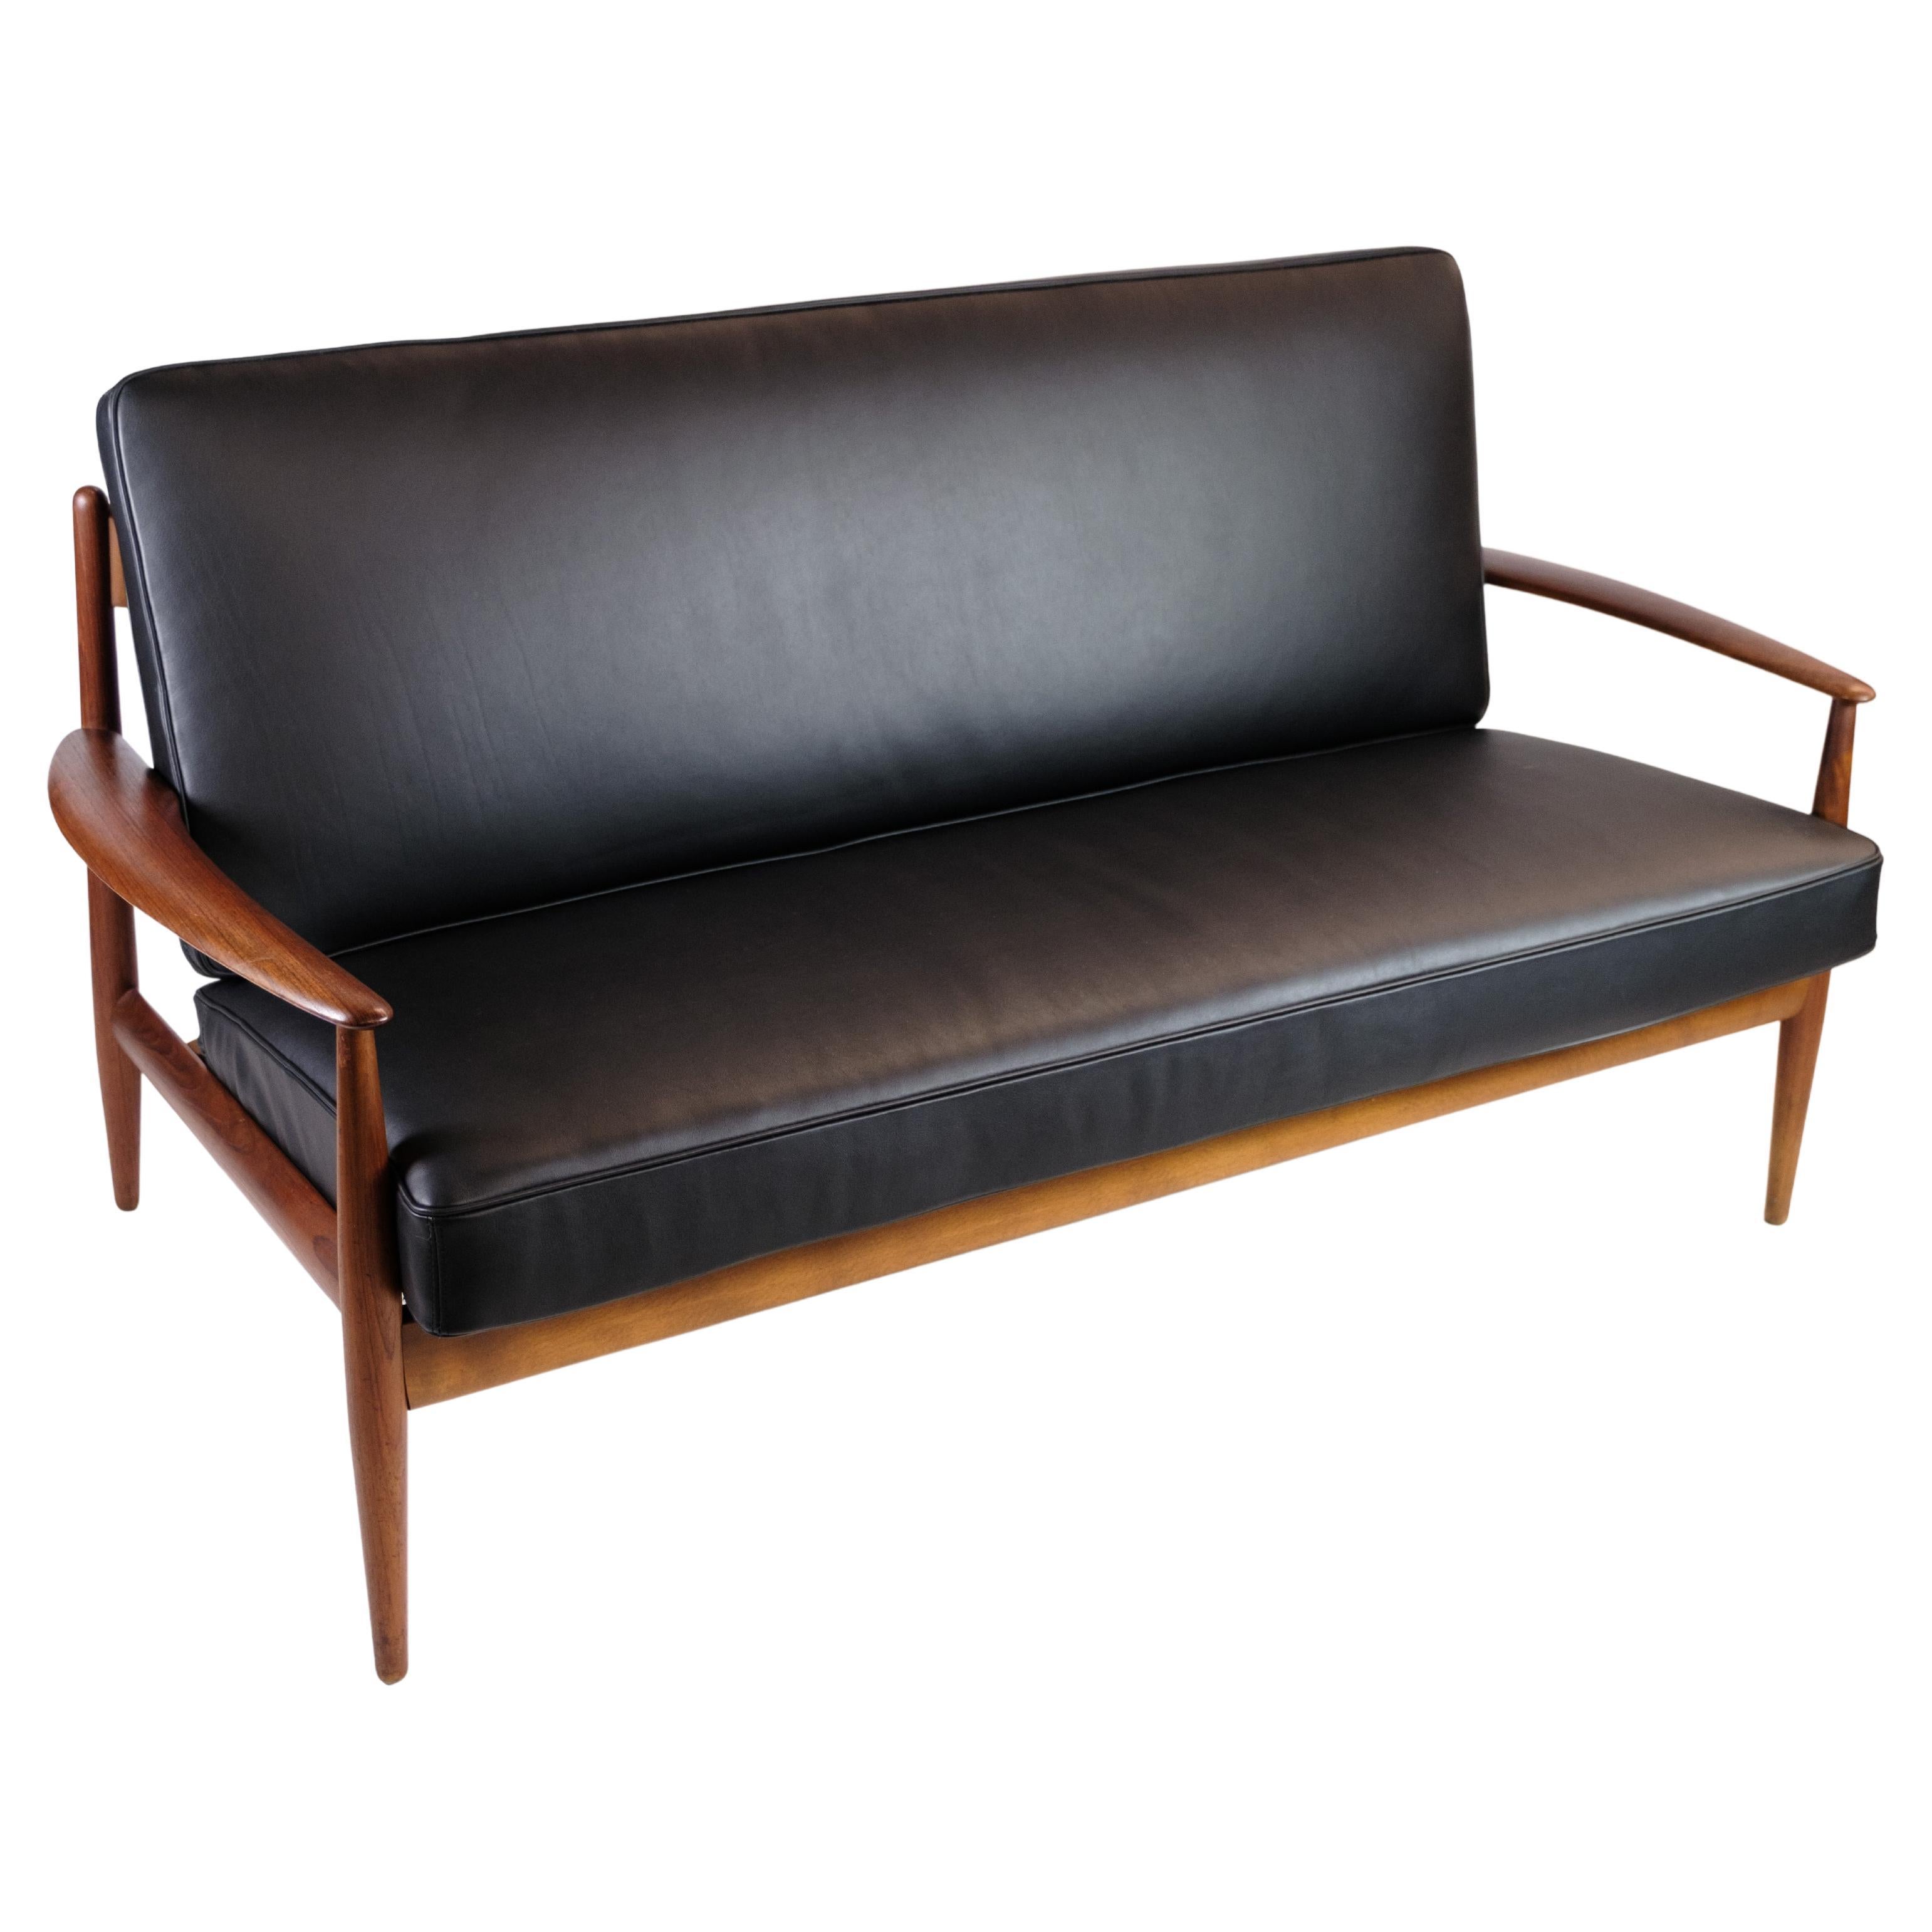 2 Seater Sofa Model 118 Made With a Teak Frame By Grete Jalk From 1960s For Sale